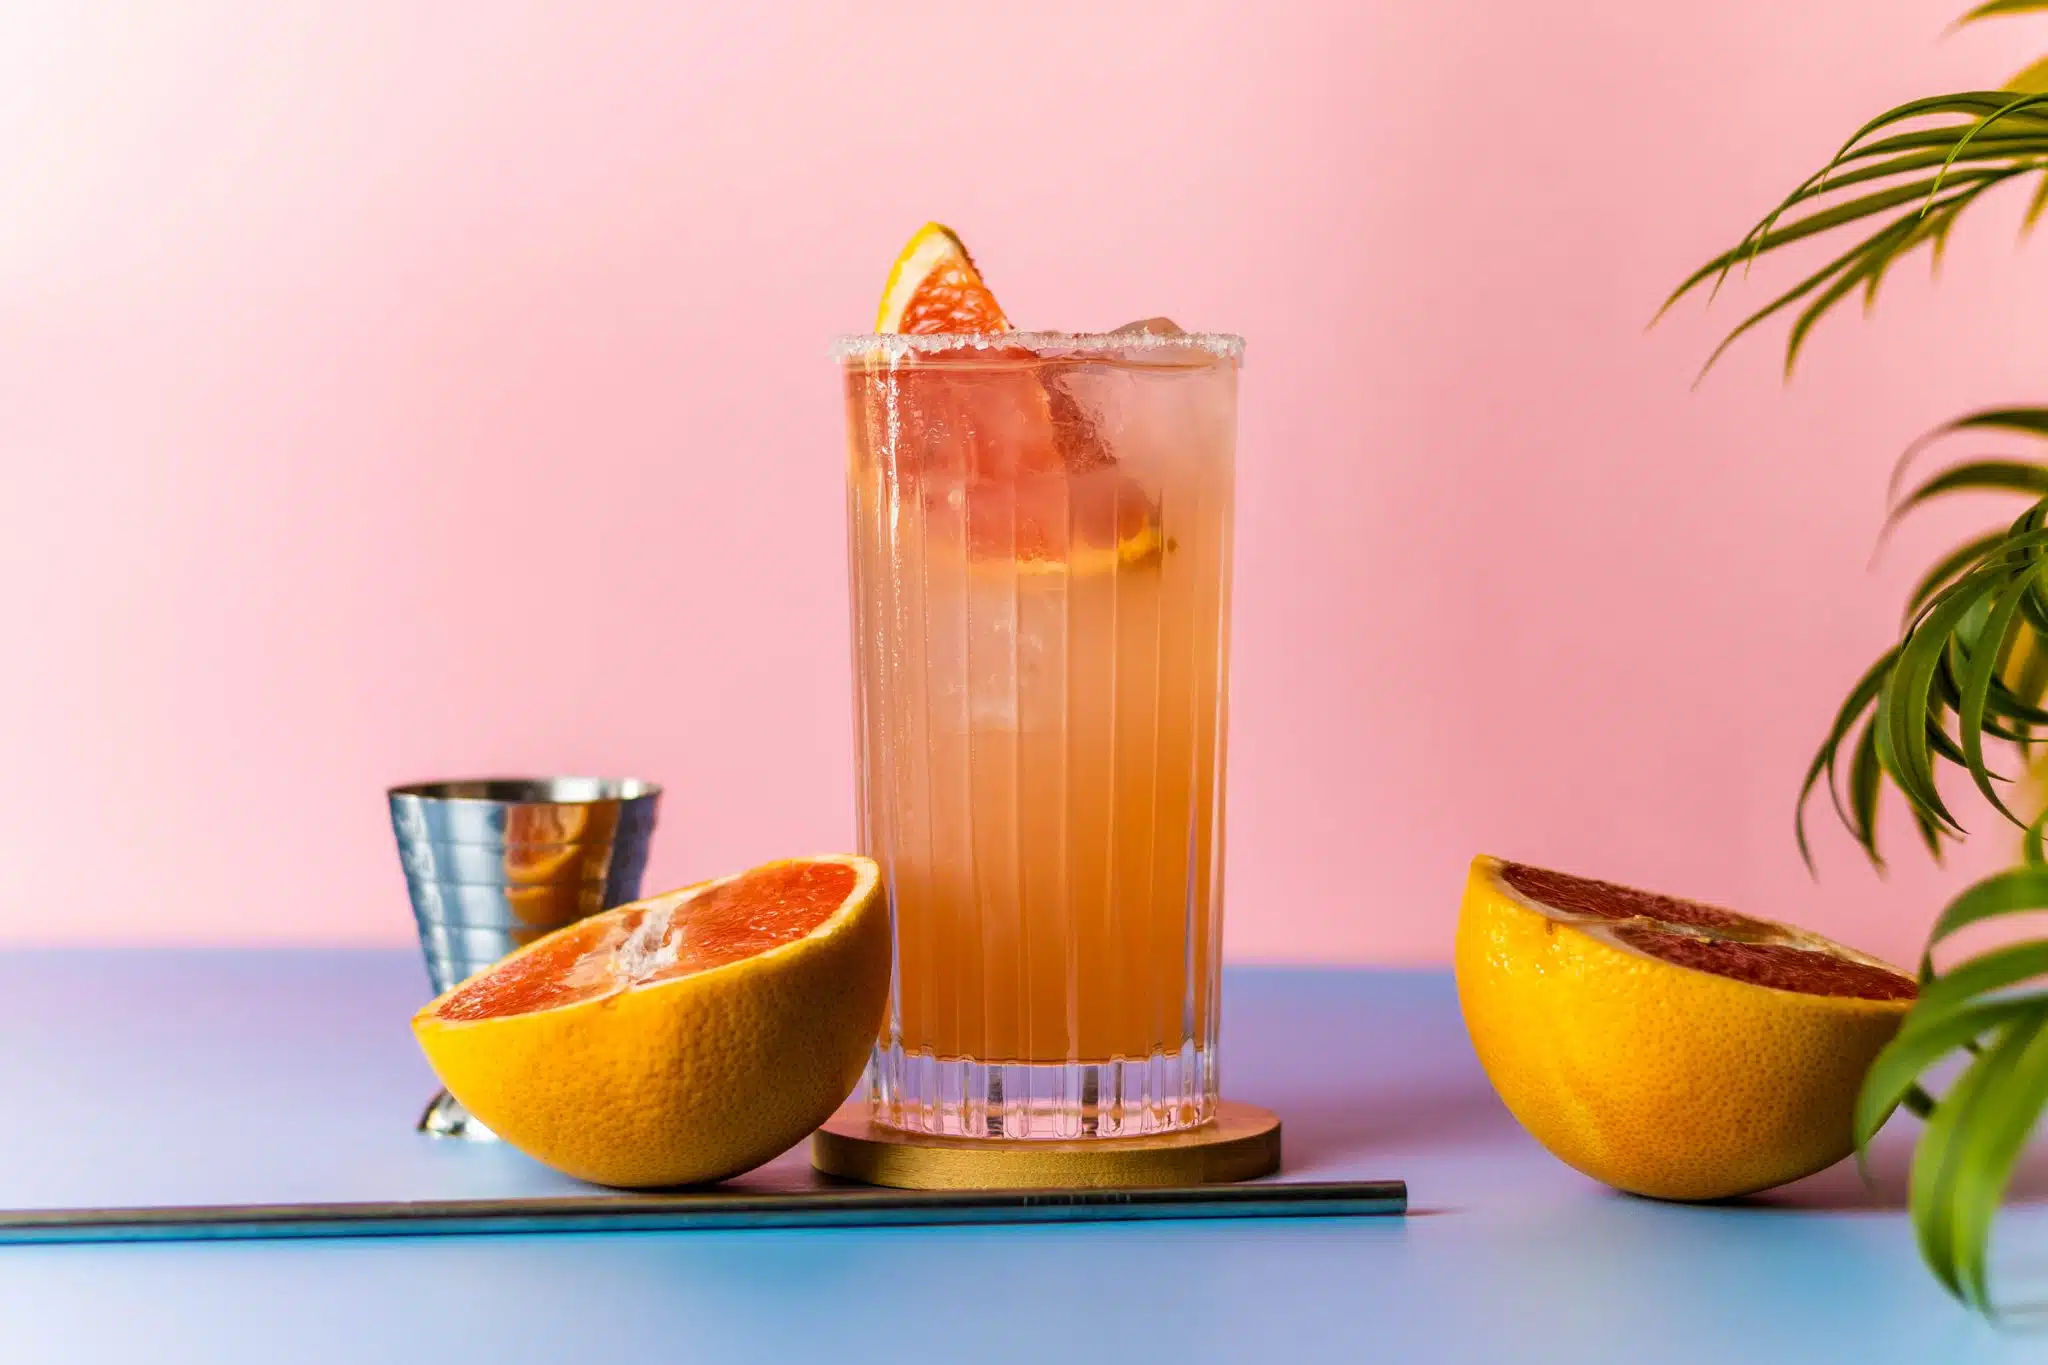 A side shot of a Paloma cocktail in a highball glass on a brown coaster placed on a light blue table with a jigger, a straw and two half grapefruits on the side